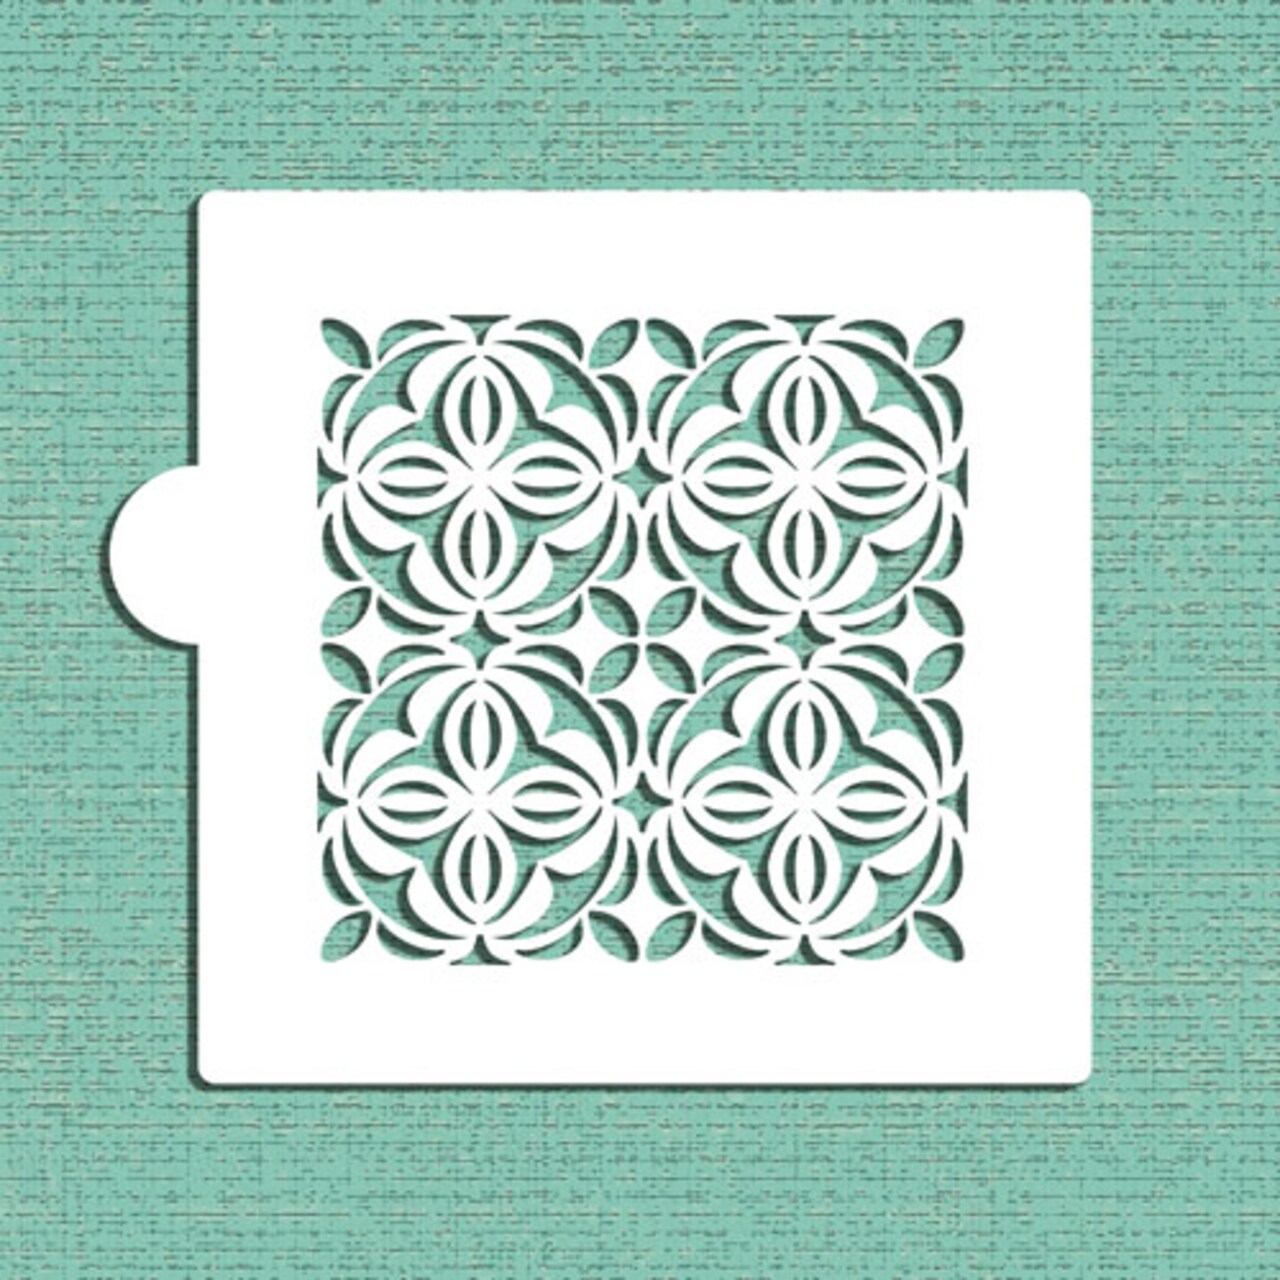 Casablanca Tile Cookie &#x26; Craft Stencil | CM133 by Designer Stencils | Cookie Decorating Tools | Baking Stencils for Royal Icing, Airbrush, Dusting Powder | Craft Stencils for Canvas, Paper, Wood | Reusable Food Grade Stencil